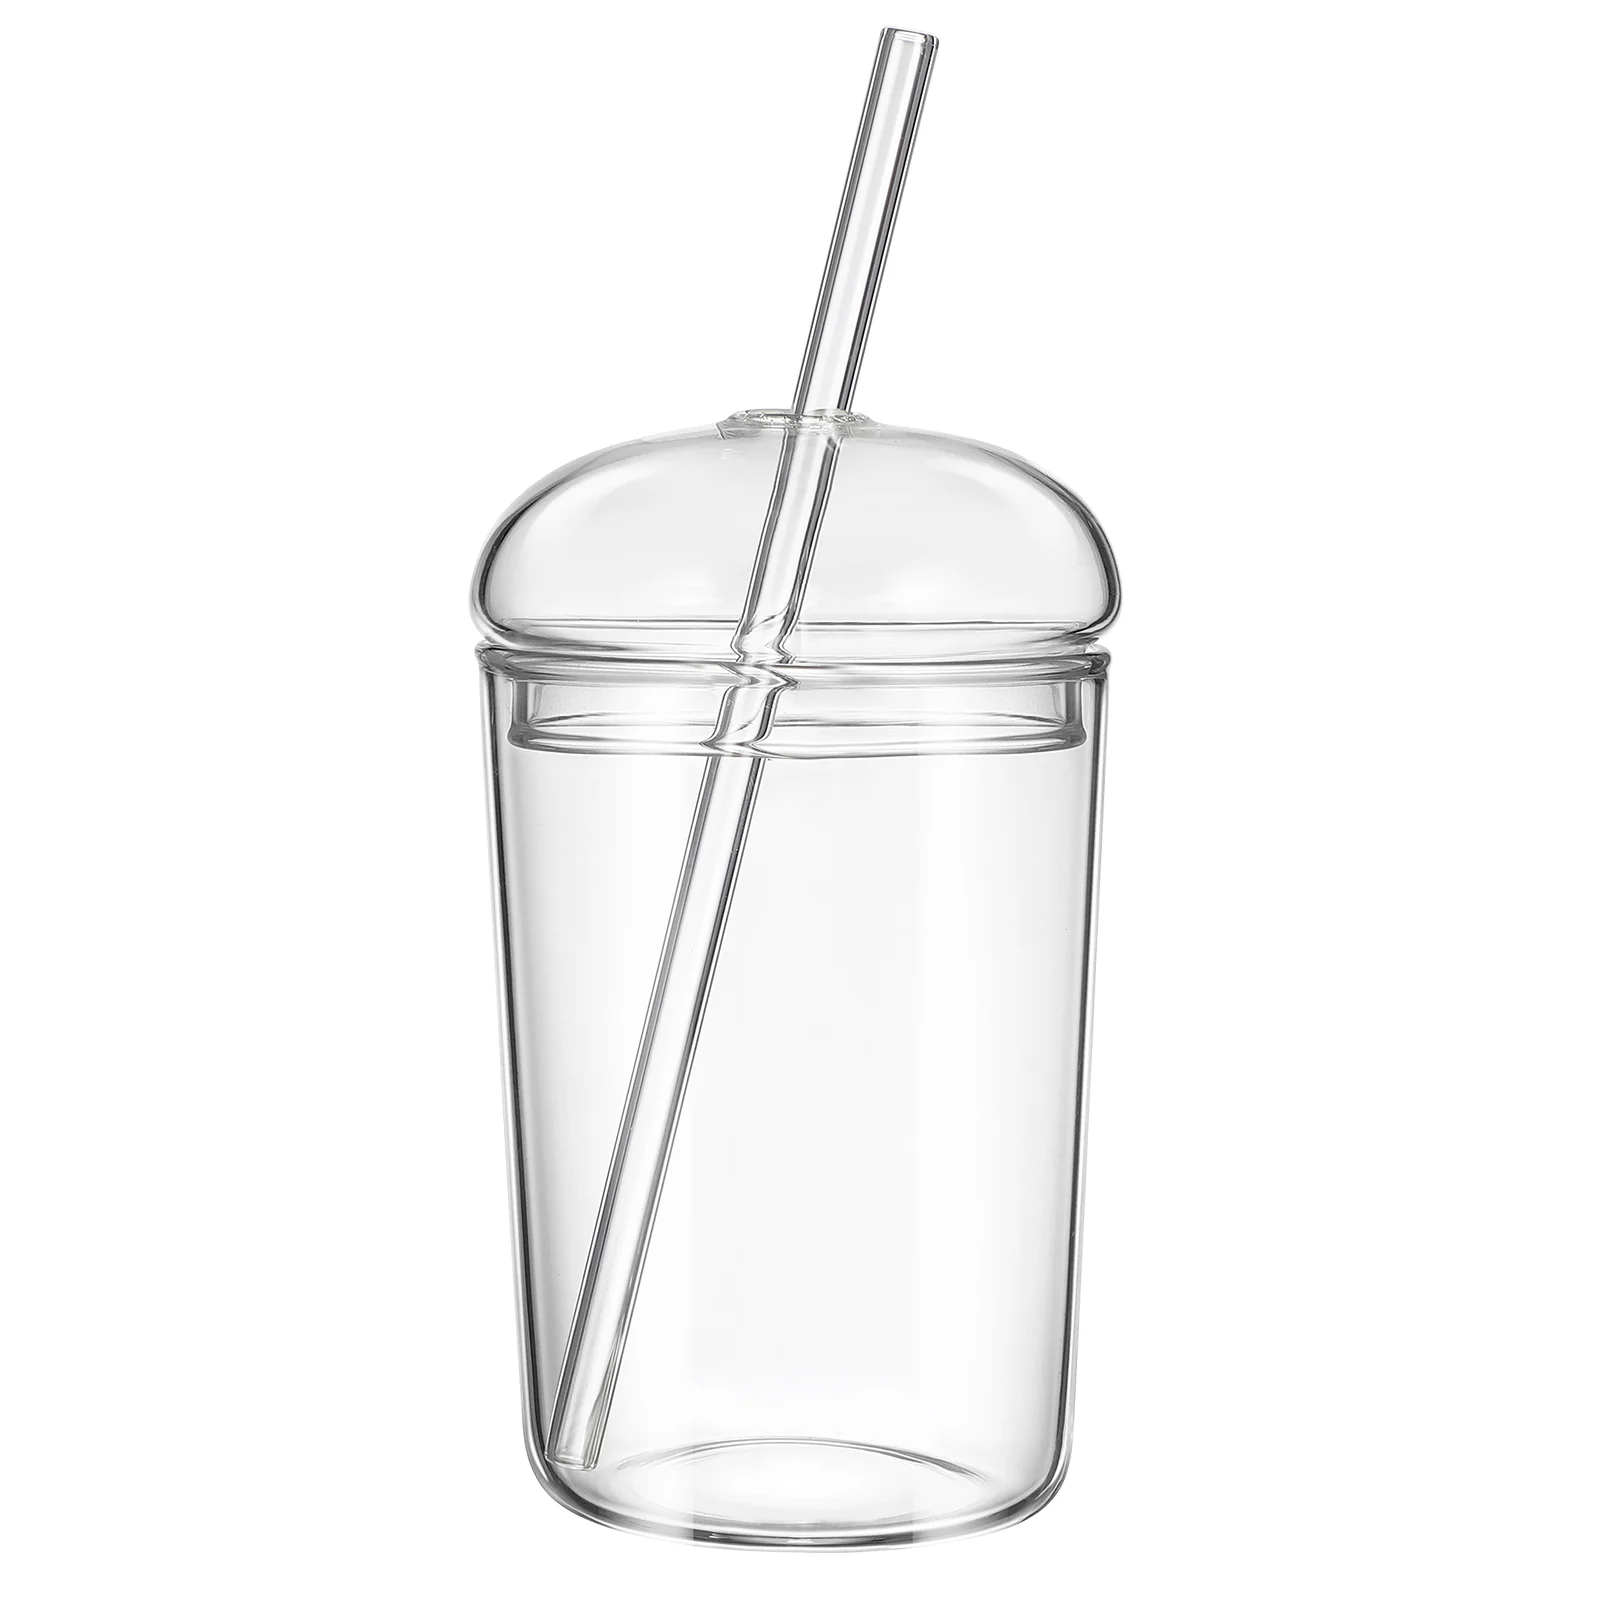 

Glass Straw Cup Transparent Coffee Cup Milk Beer Beverage Juice Mug Mocha Cups With Lid For Home Office Bar Glasses